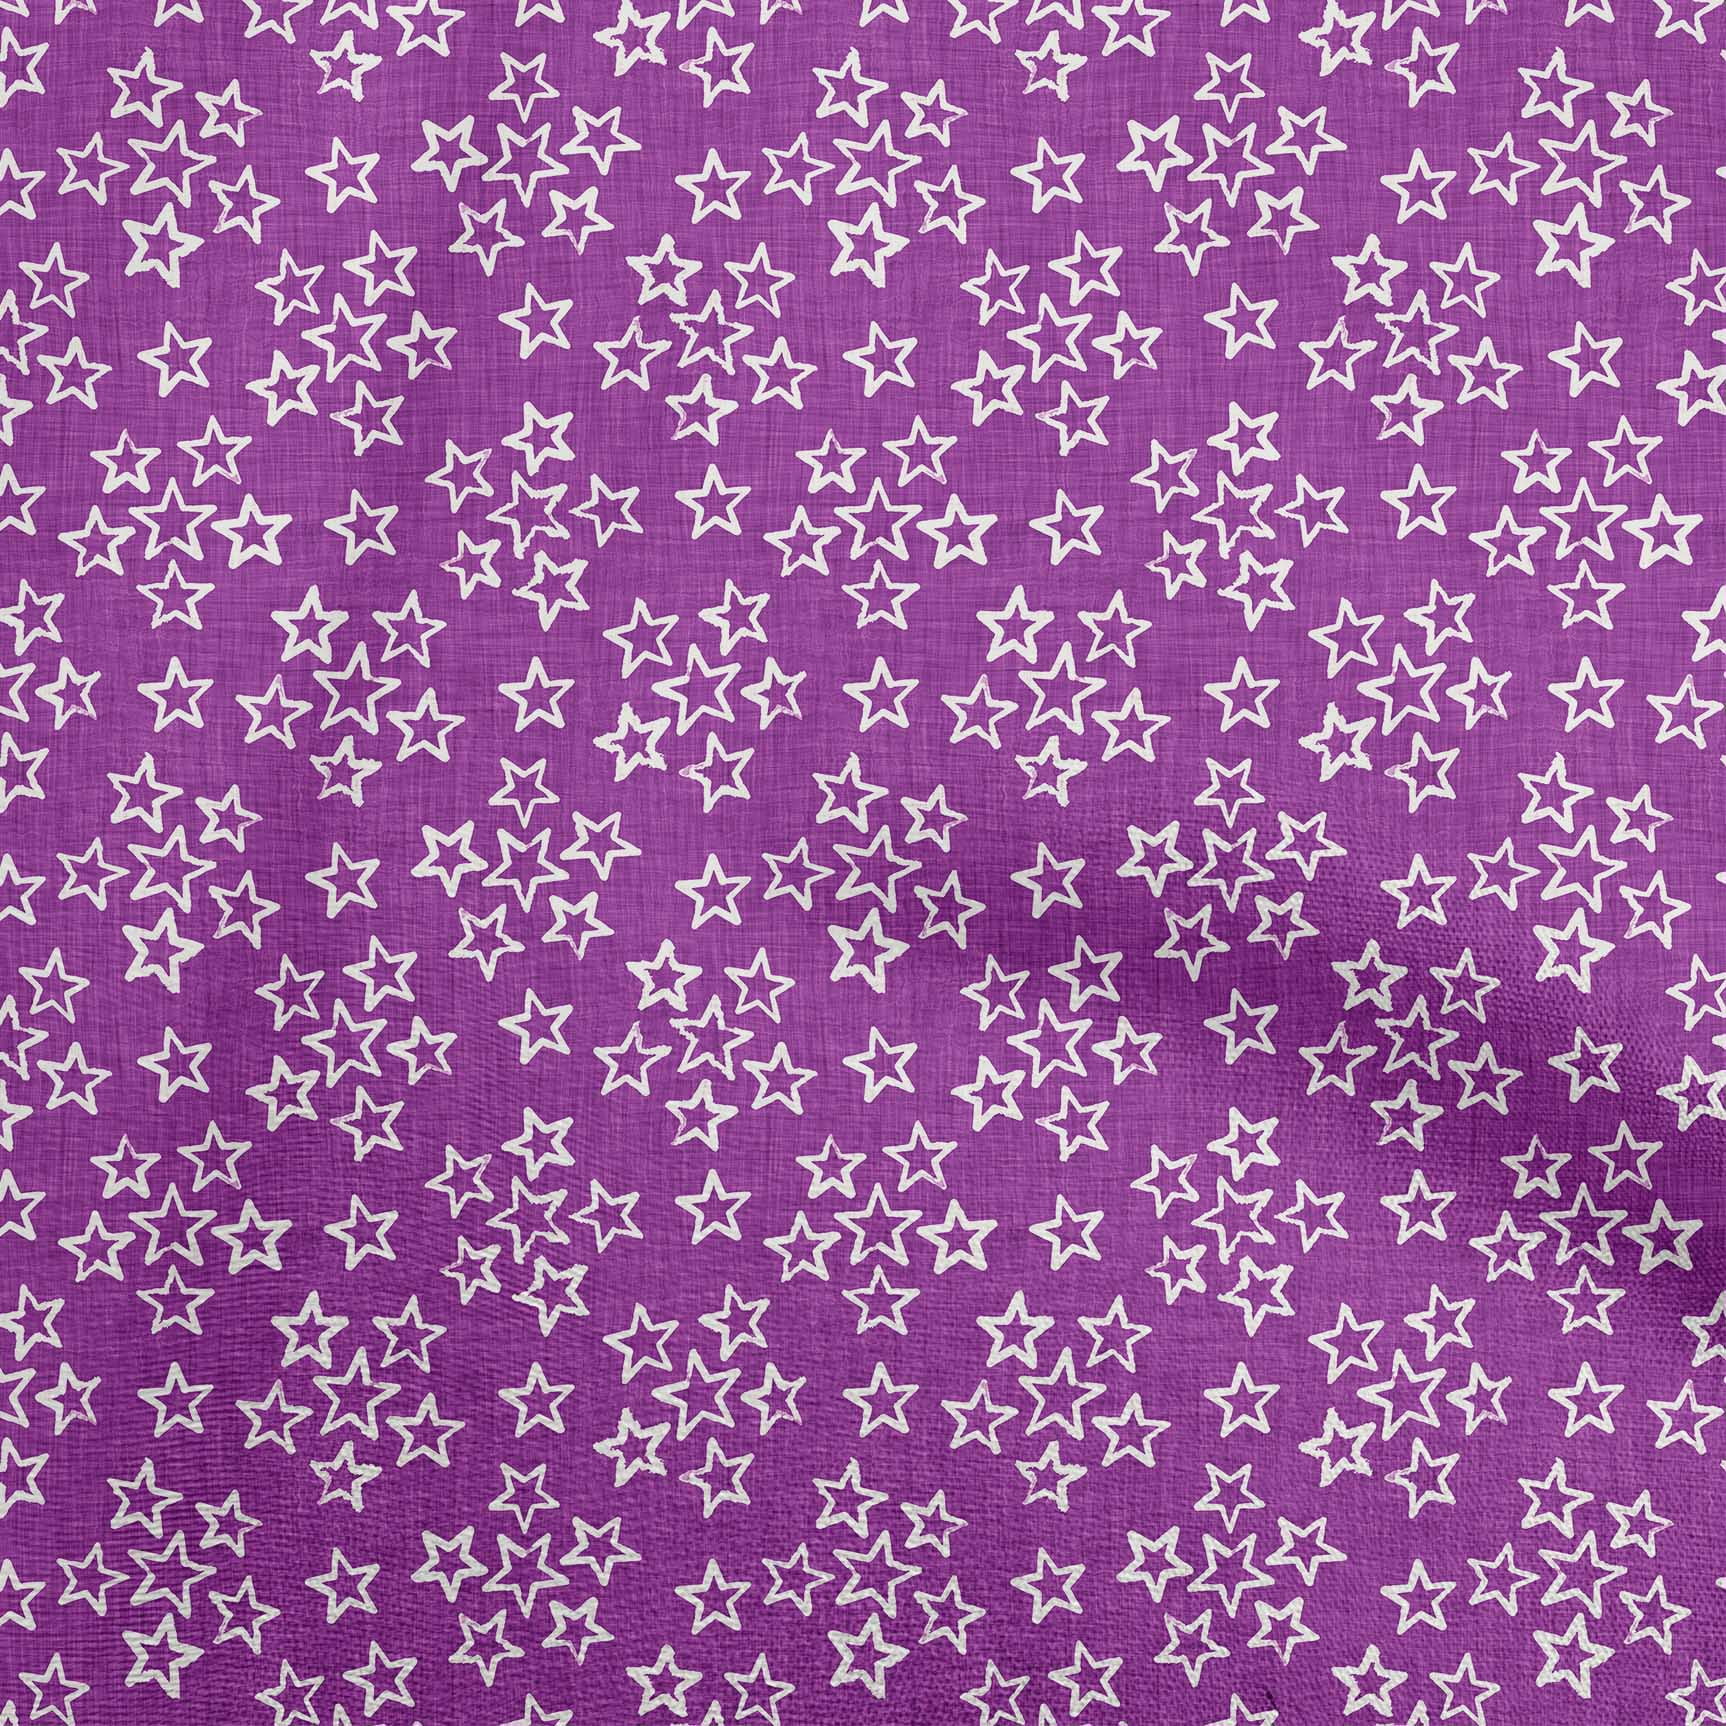  oneOone Viscose Jersey Magenta Fabric Block Sewing Craft  Projects Fabric Prints by Yard 60 Inch Wide-LV : Everything Else